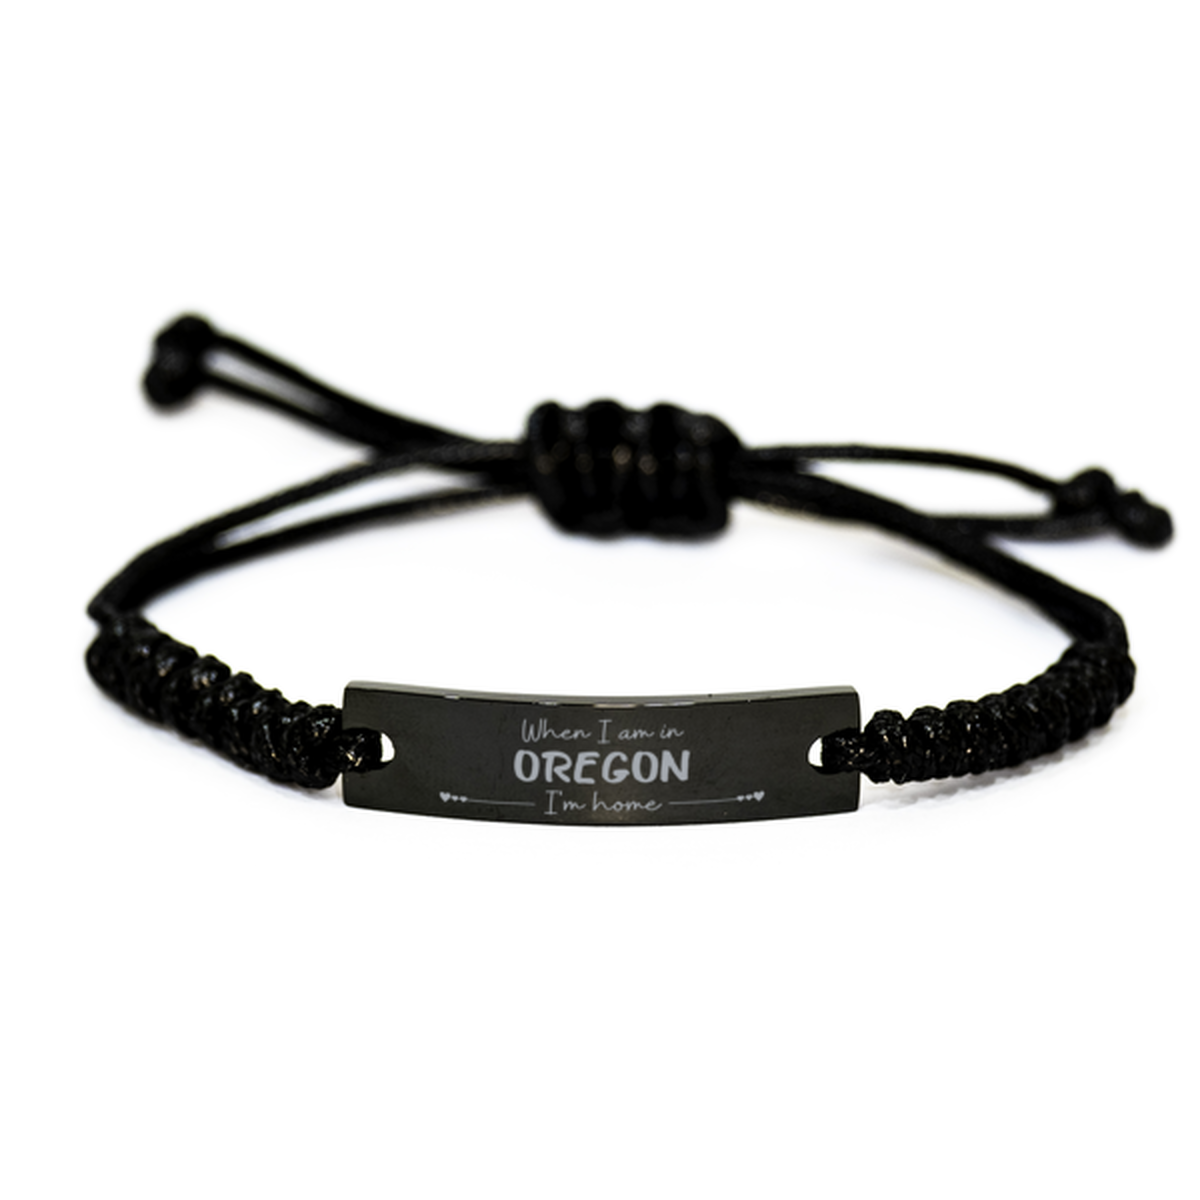 When I am in Oregon I'm home Black Rope Bracelet, Cheap Gifts For Oregon, State Oregon Birthday Gifts for Friends Coworker